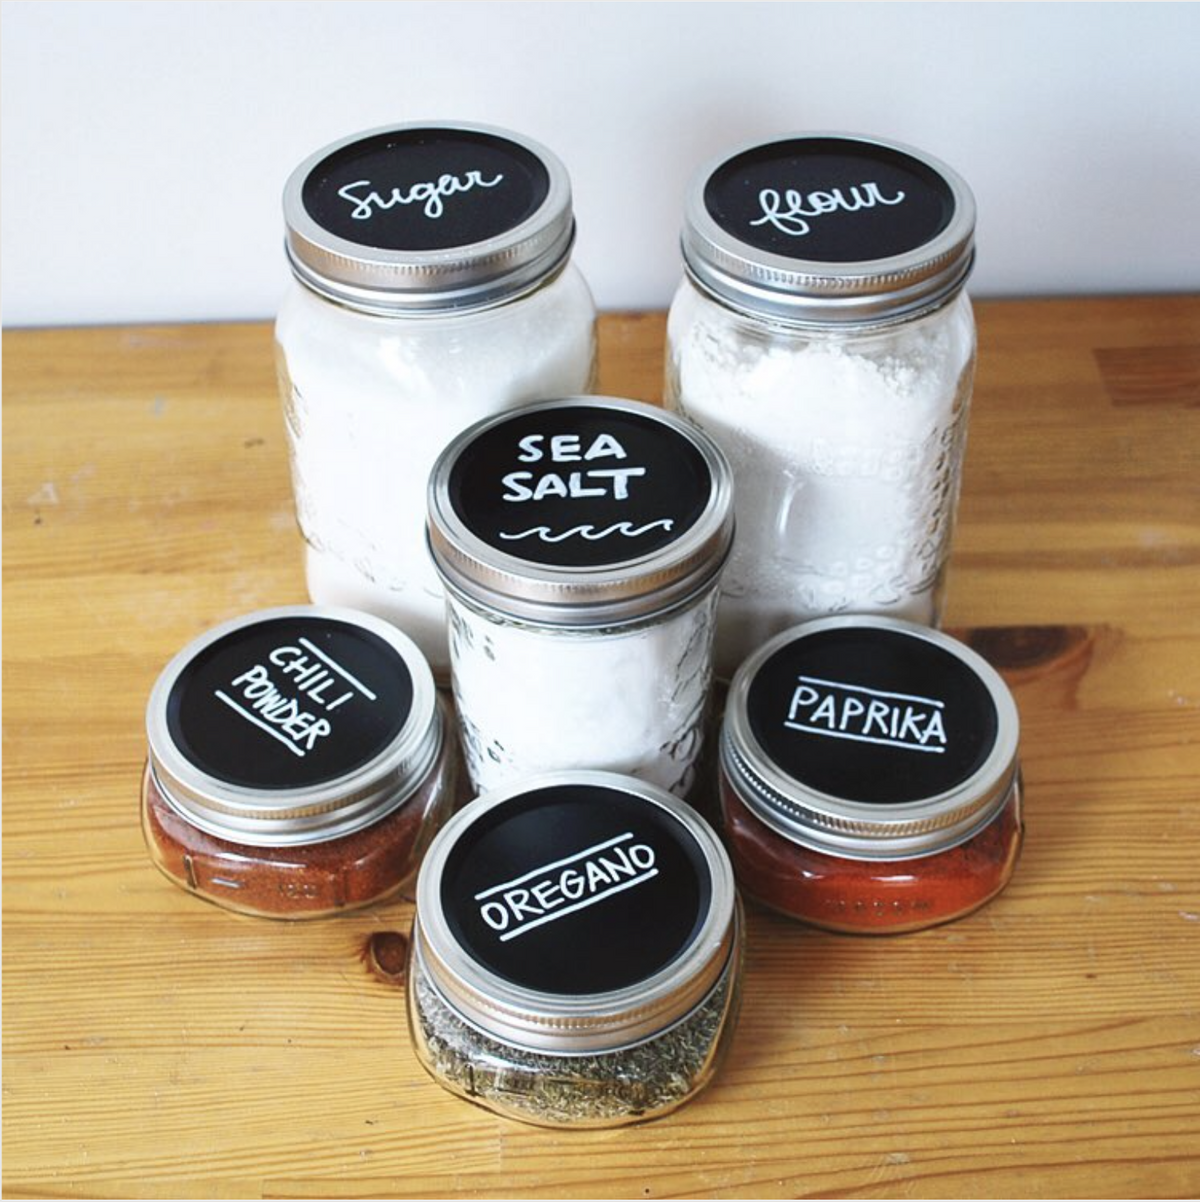 Canning label size charts for regular & wide mouth mason jars